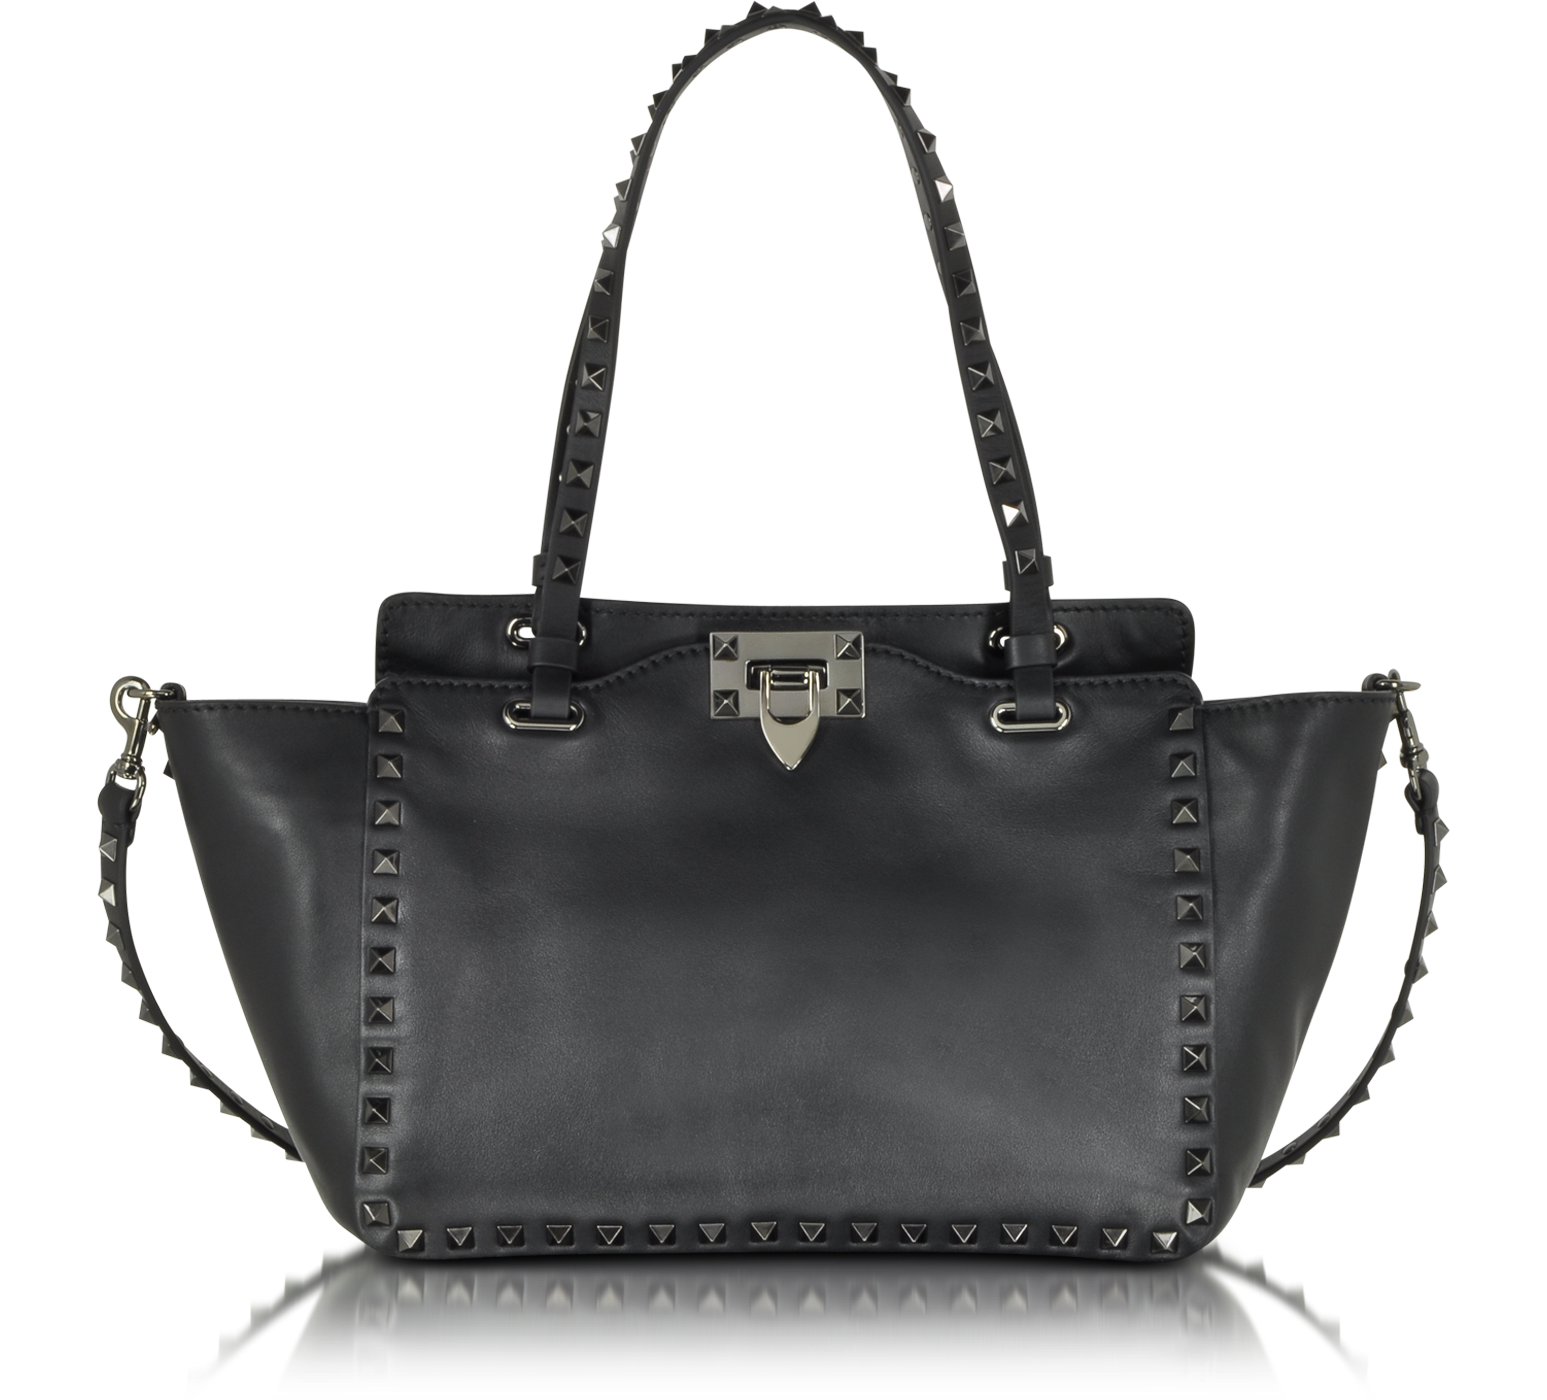 Valentino Rockstud Noir Small Leather Tote at FORZIERI